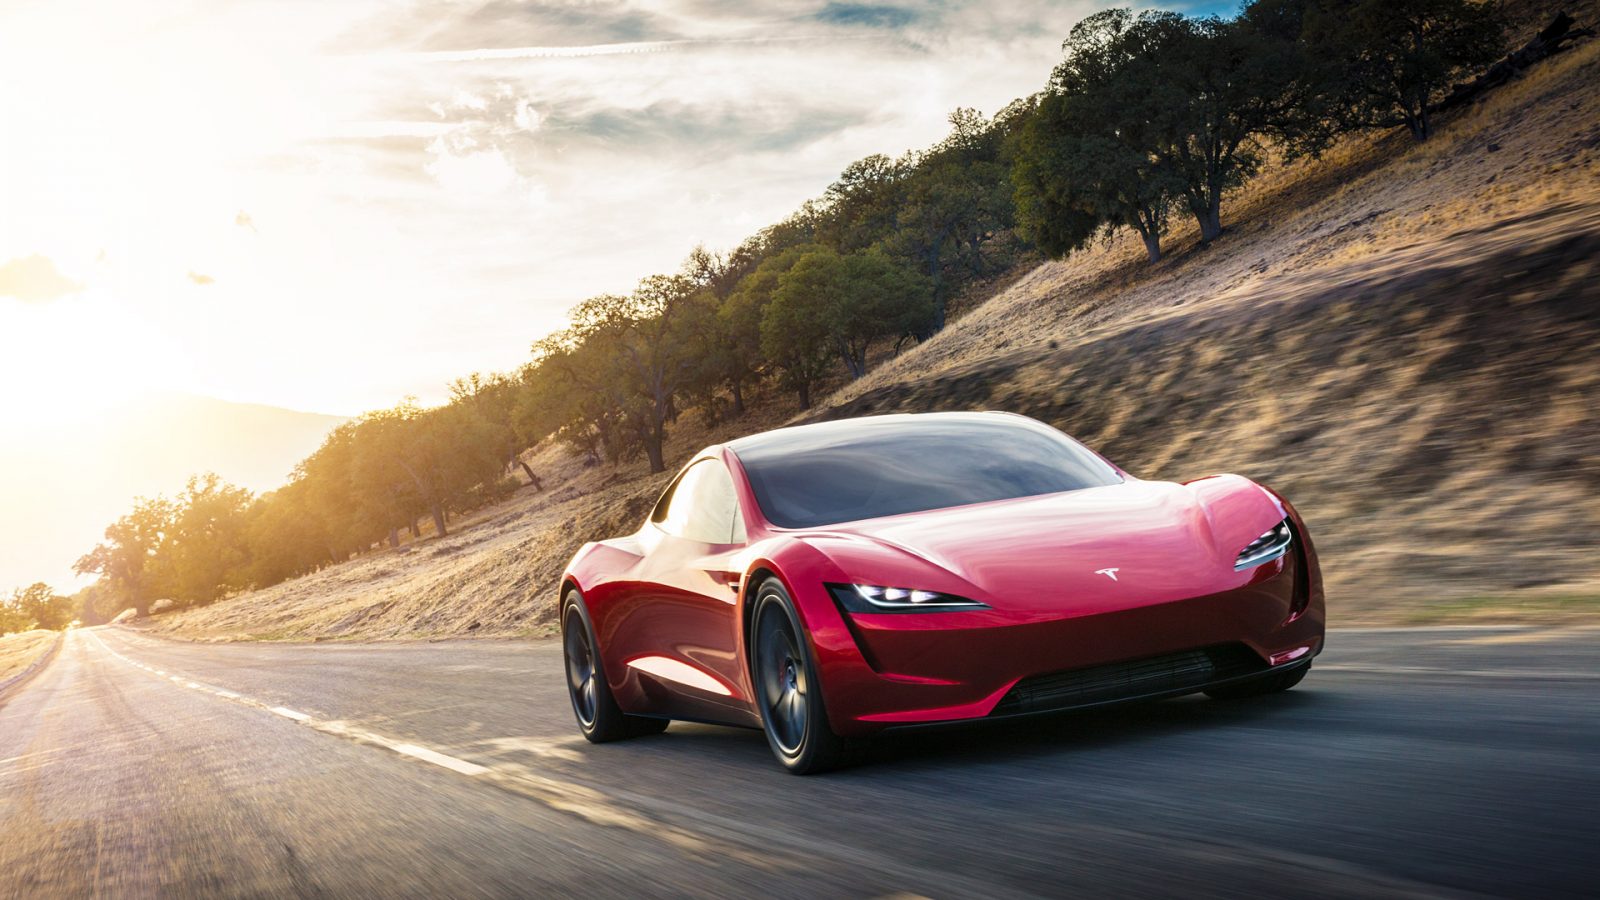 Only People With Strong Vocabularies Can Pass This Dictionary Quiz. Can You? Tesla Roadster